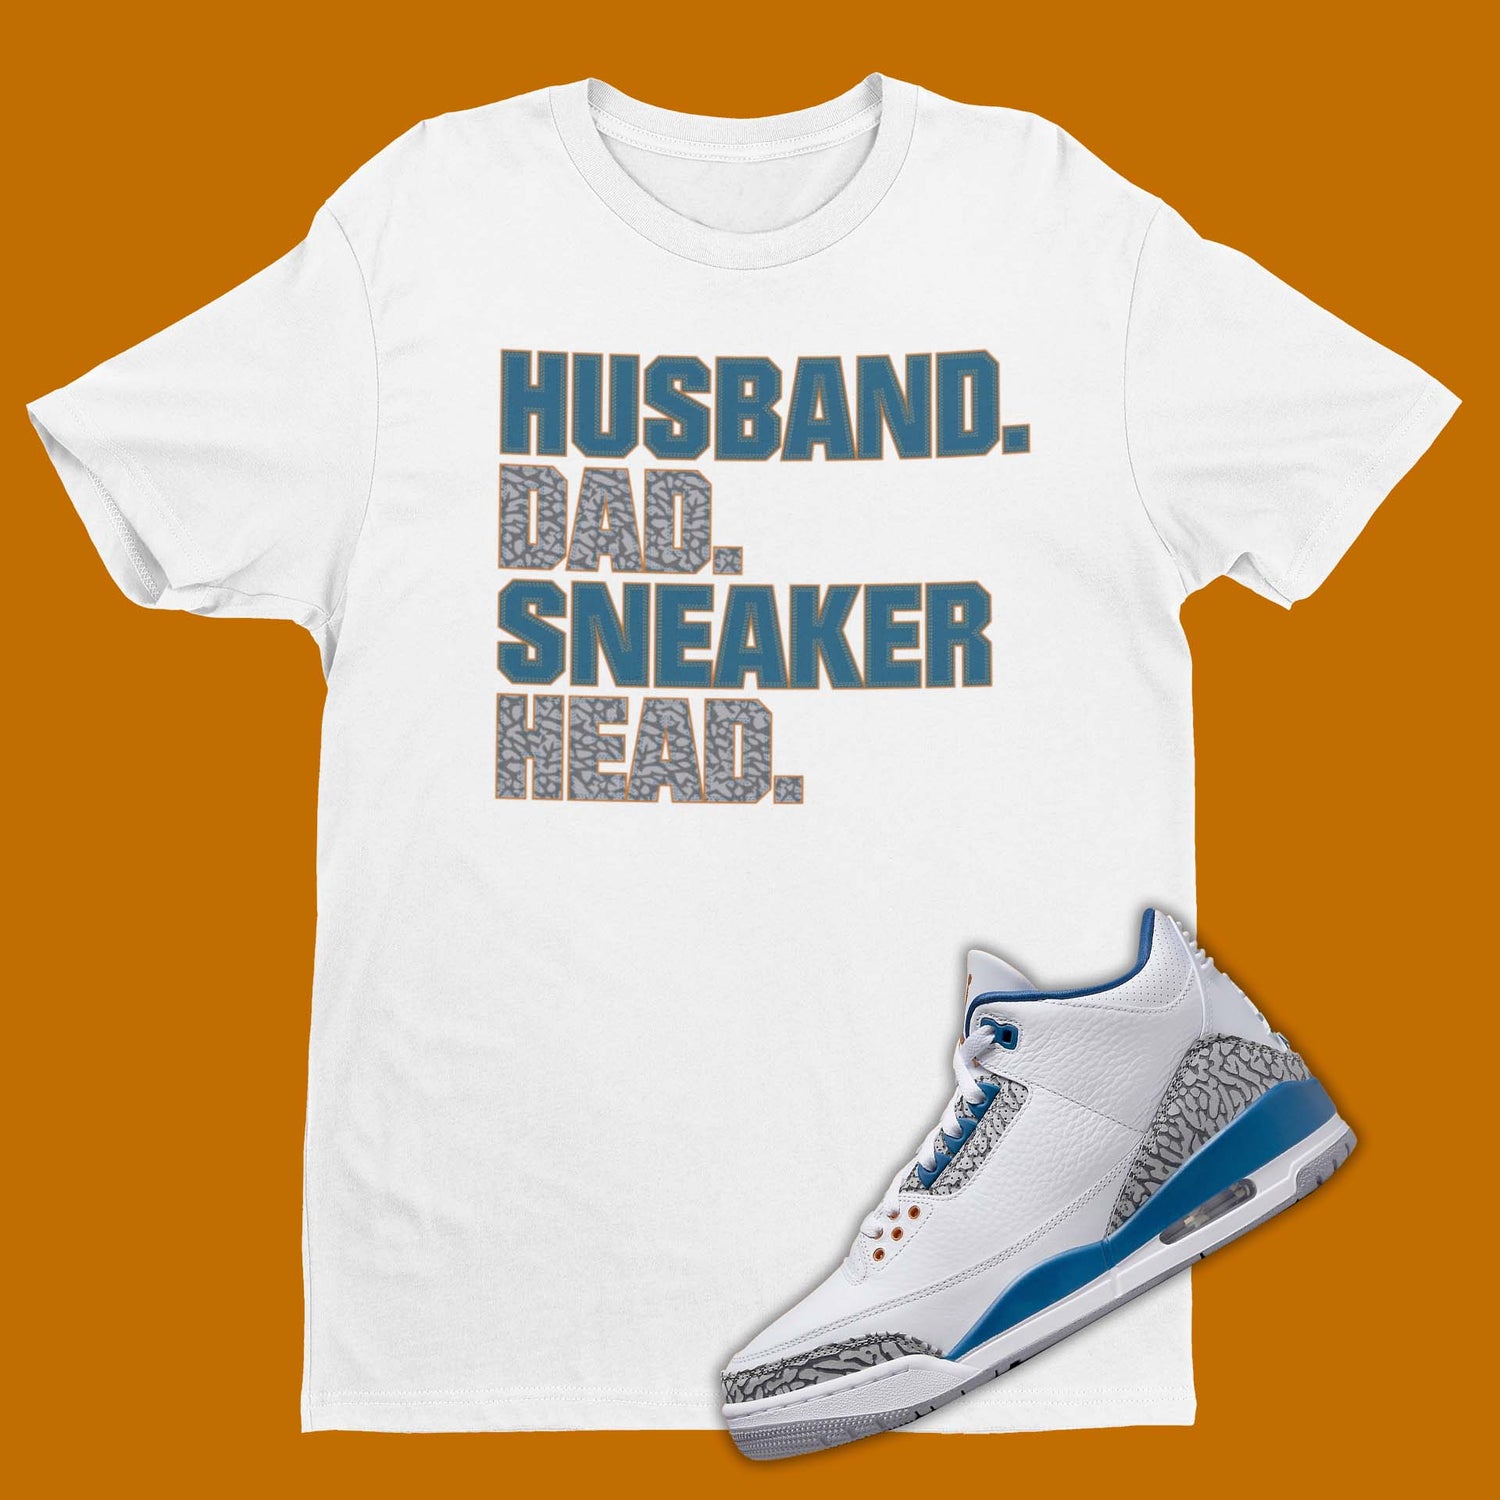 The perfect husband dad sneakerhead shirt to match your sneakers! Our Match Jordan 3 t-shirt is made to compliment your kicks. Bring your sneakers to the next level with this Wizards Air Jordan 3 shirt. Match and feel trendy with this graphic tee!